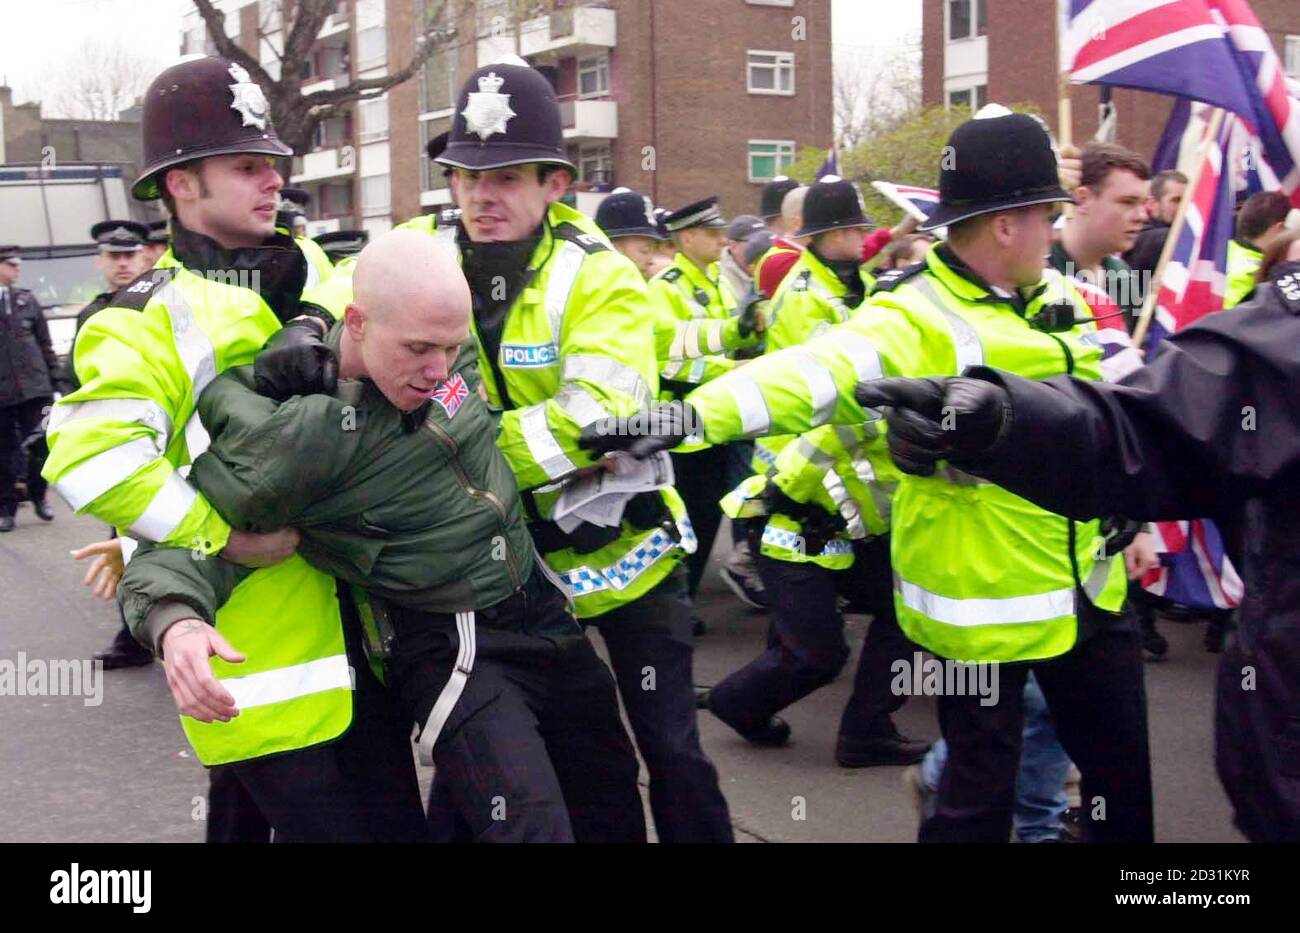 Police restraining a marcher at a National Front march in Bermondsey, London. Anti-racism campaigners were outraged at the second successive weekend's march. An Asian man was beaten in a racist attack by 10 white men just hours after last Saturday's demonstration   * ... in Bermondsey, south east London.  Stock Photo